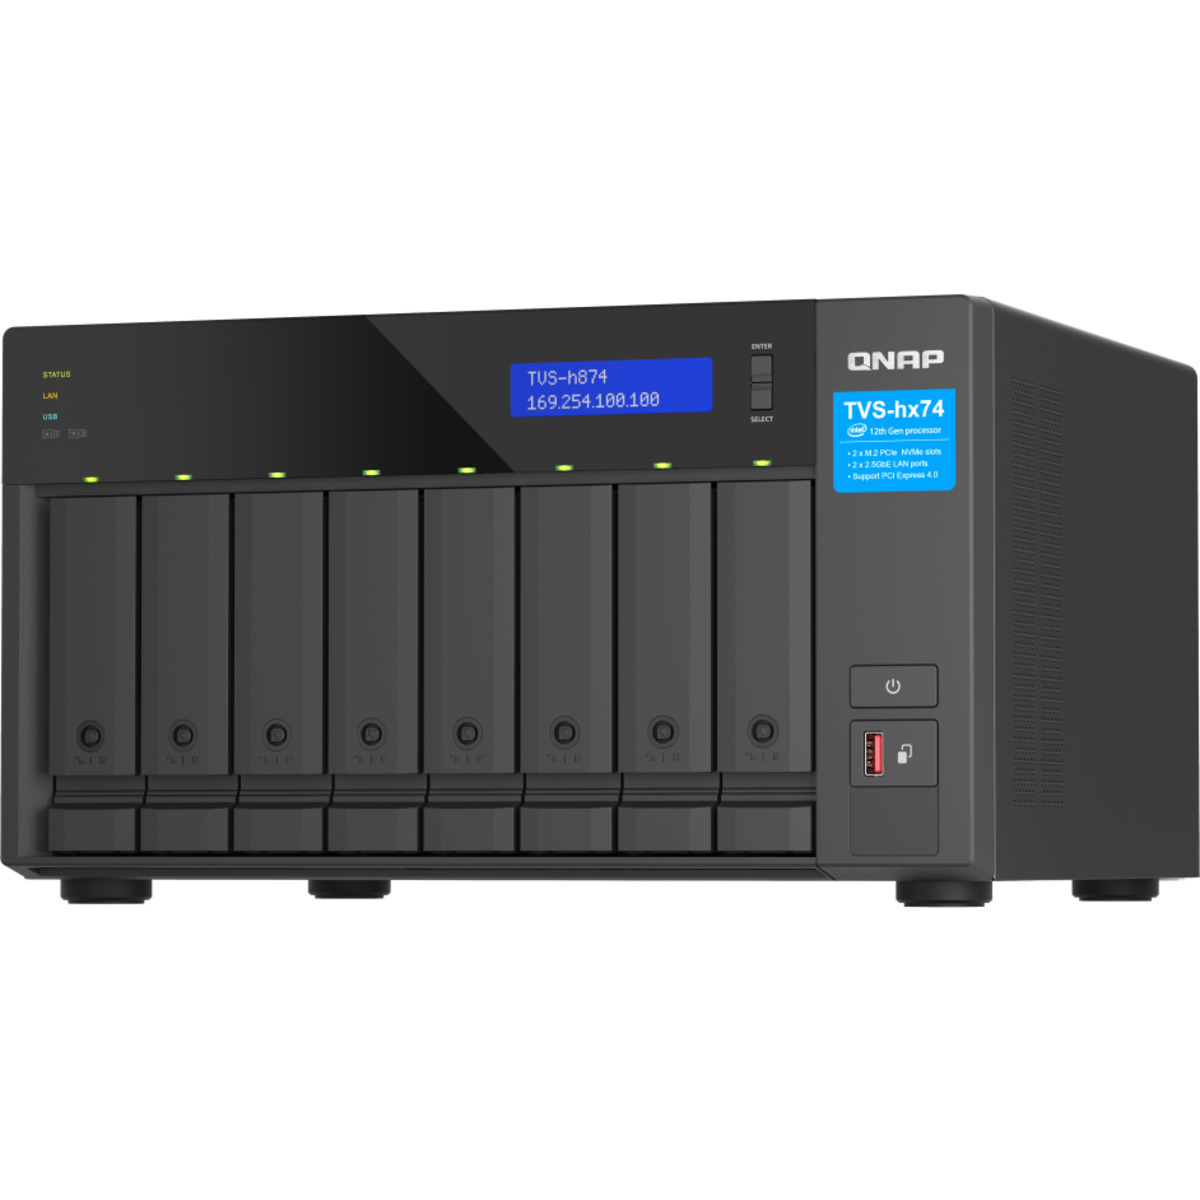 buy QNAP TVS-h874 Core i7 128tb Desktop NAS - Network Attached Storage Device 8x16000gb Seagate EXOS X18 ST16000NM000J 3.5 7200rpm SATA 6Gb/s HDD ENTERPRISE Class Drives Installed - Burn-In Tested - nas headquarters buy network attached storage server device das new raid-5 free shipping simply usa TVS-h874 Core i7